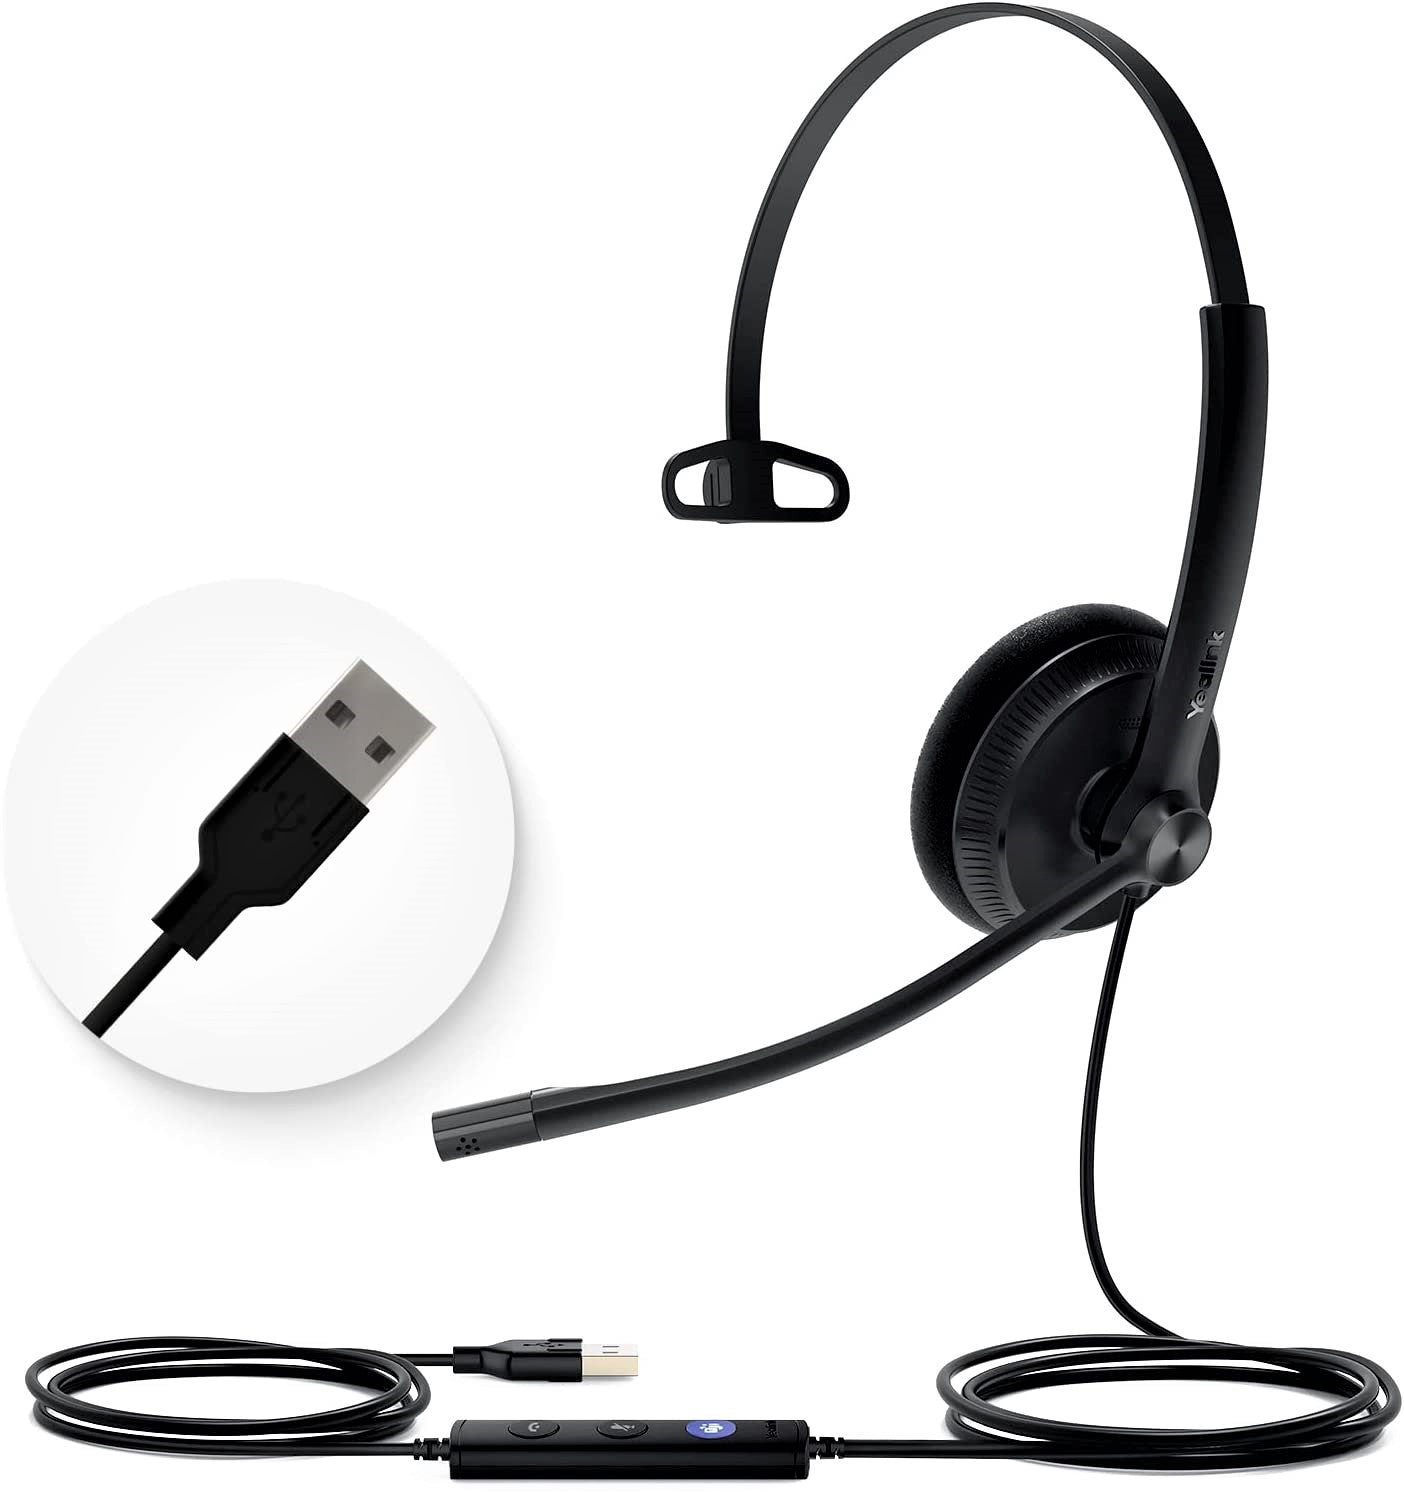 Yealink Headset with Microphone USB Headset Computer Headset PC Laptop Headset Teams Certified UH36 UH34 Wired Noise Cancelling with Mic Stereo